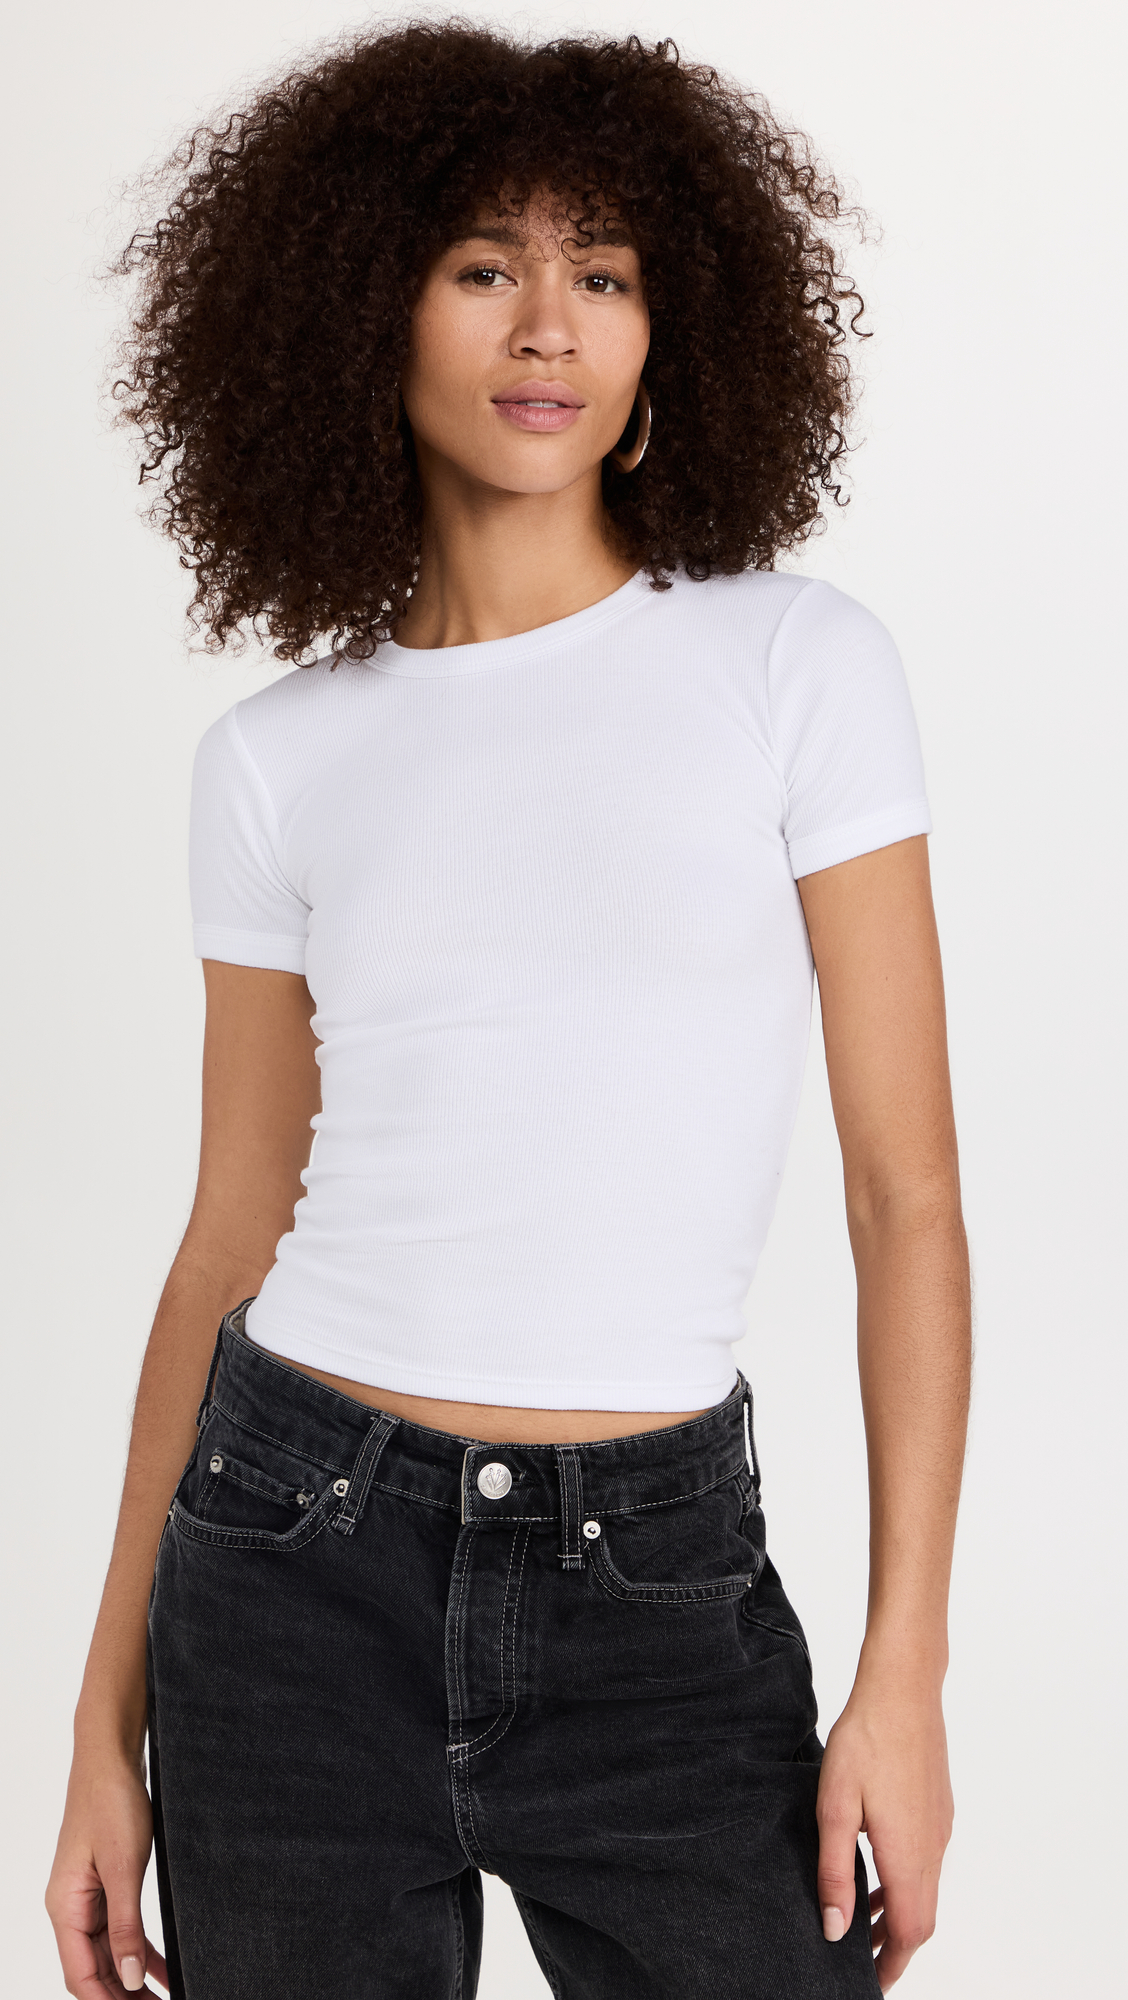 The 3 Best-Selling White T-Shirts on Who What Wear to Buy | Who What Wear